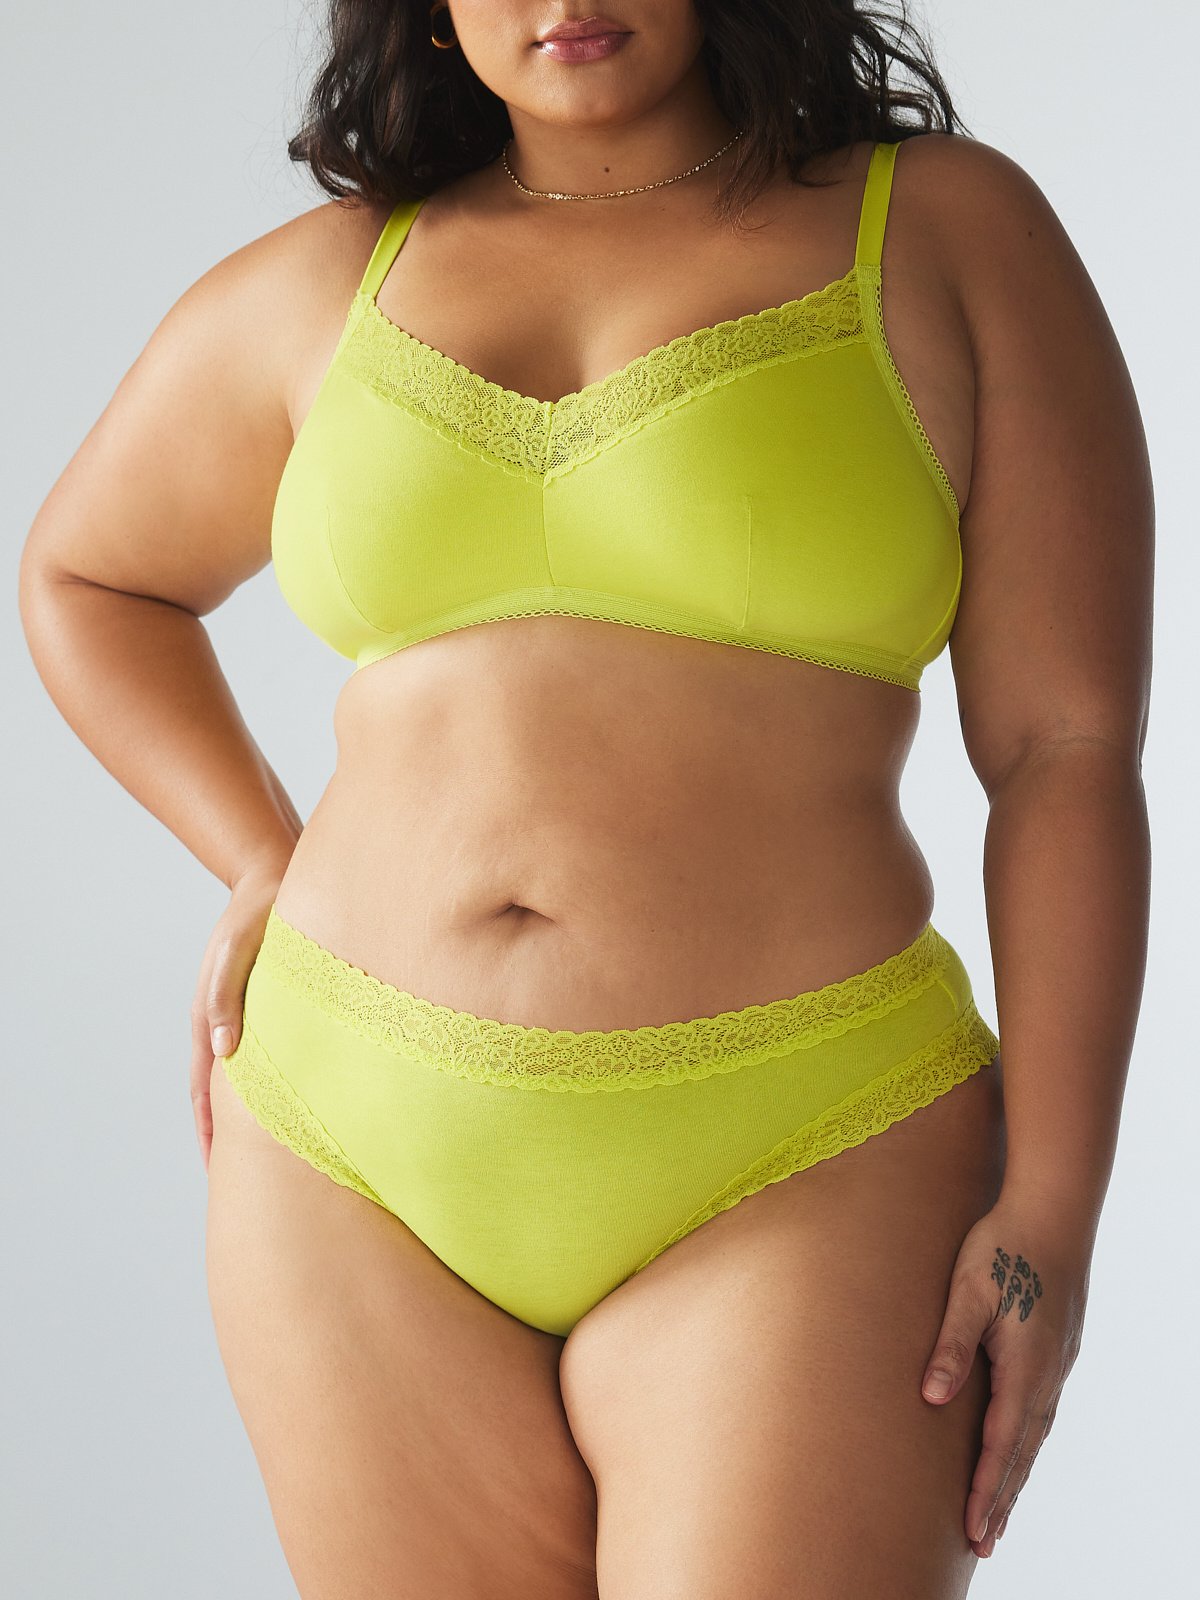 Cheeky Briefs in Honey Yellow Cotton, Ethical & Sustainable Lingerie